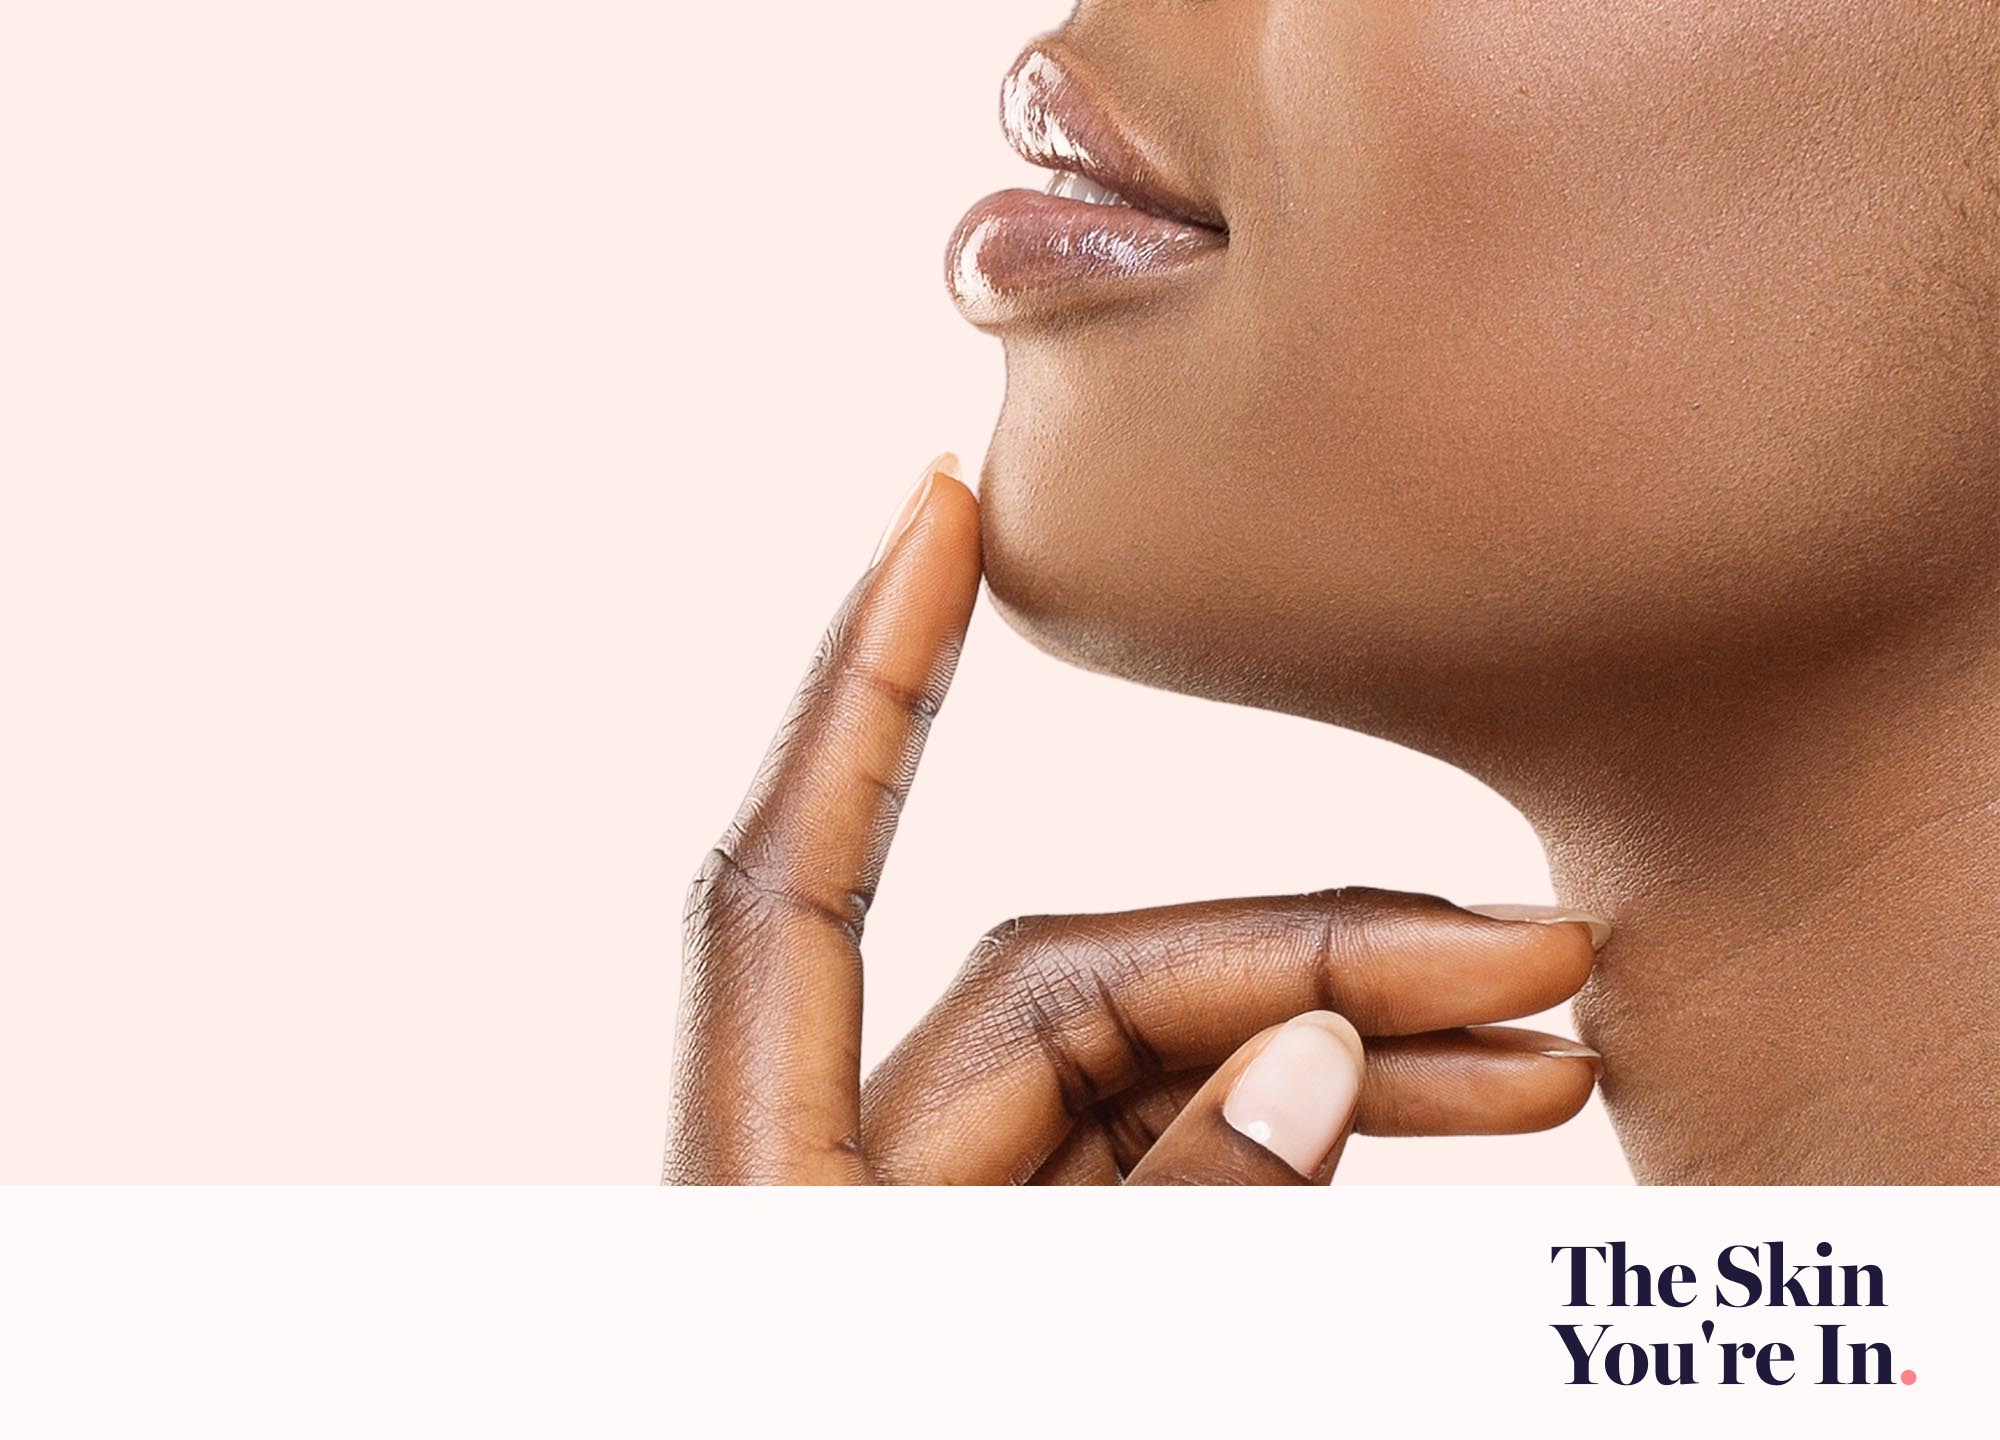 Doctors have been injecting Botox around the mouth, chin, jawline, and neck for more than a decade now. Learn more about their strategies.